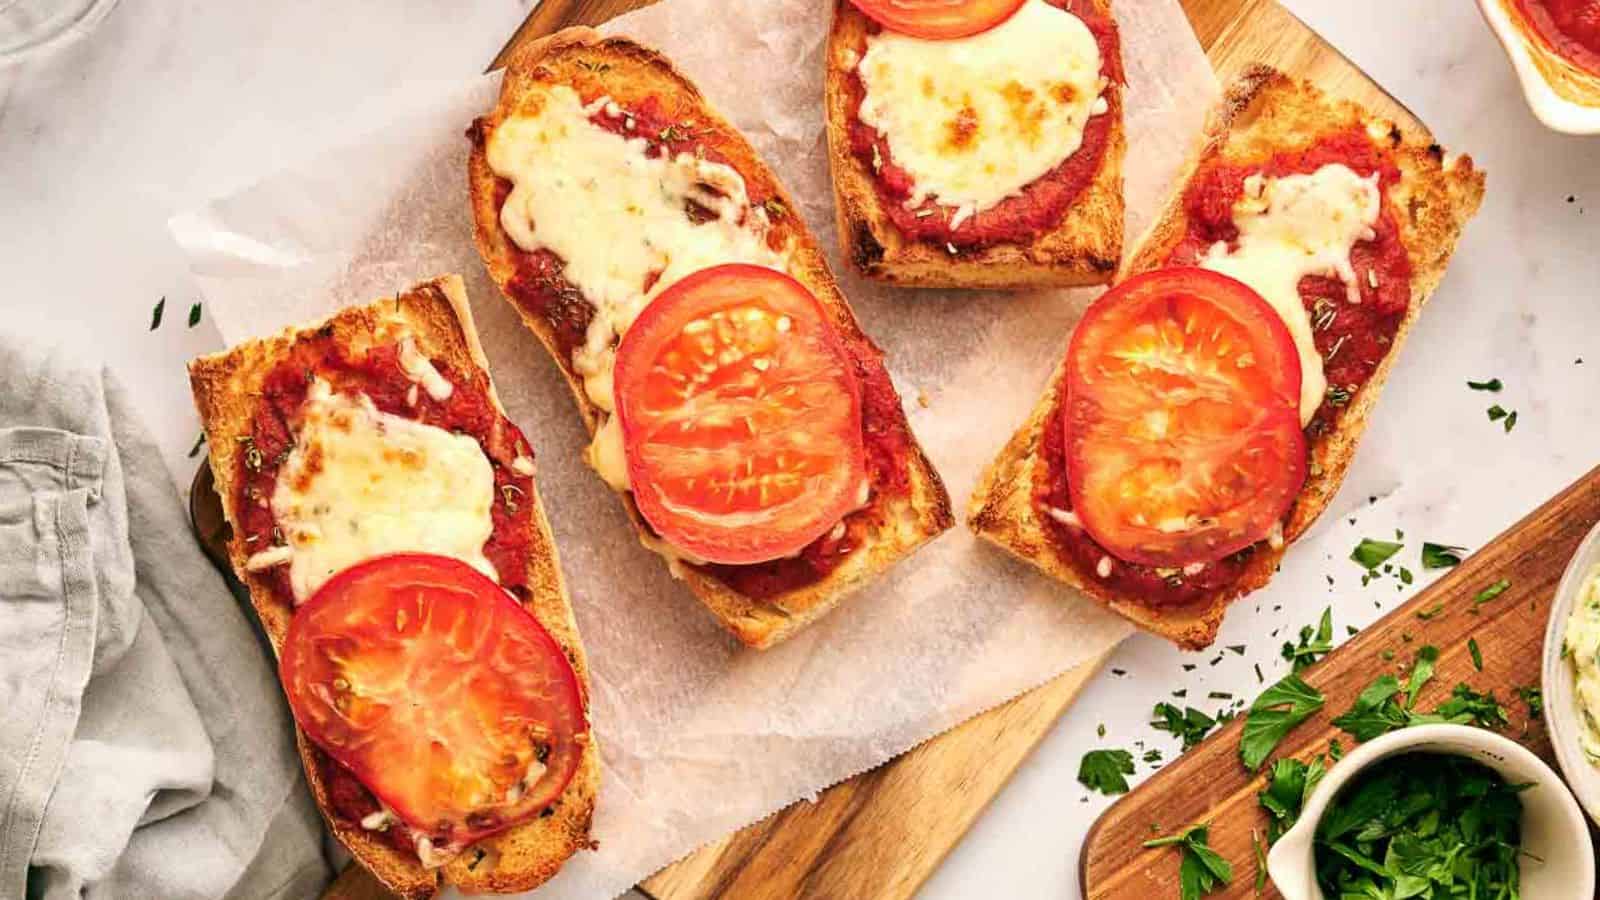 Four slices of French bread pizza with tomatoes and cheese on a cutting board.